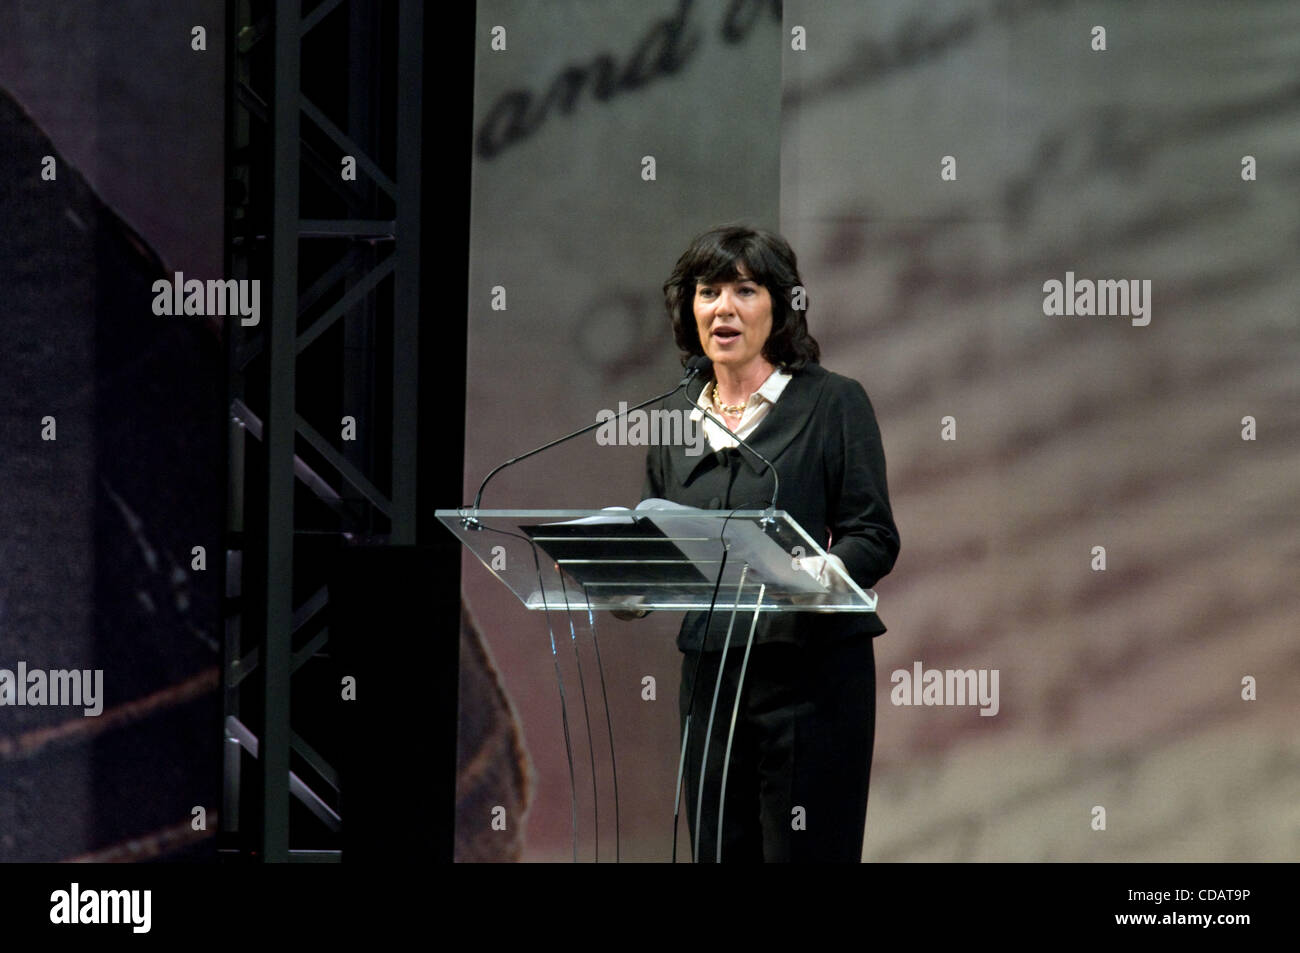 September 13th, 2010, Philadelphia, PA, USA- Christiane Amanpour, anchor of ABC News' This Week, at the Liberty award ceremony for Former Prime Minister of England, Tony Blair. Blair was the 2010 recipient of the Liberty Medal.  (Credit Image: (c) Ricky Fitchett/ZUMA Press) Photographer: Ricky Fitch Stock Photo